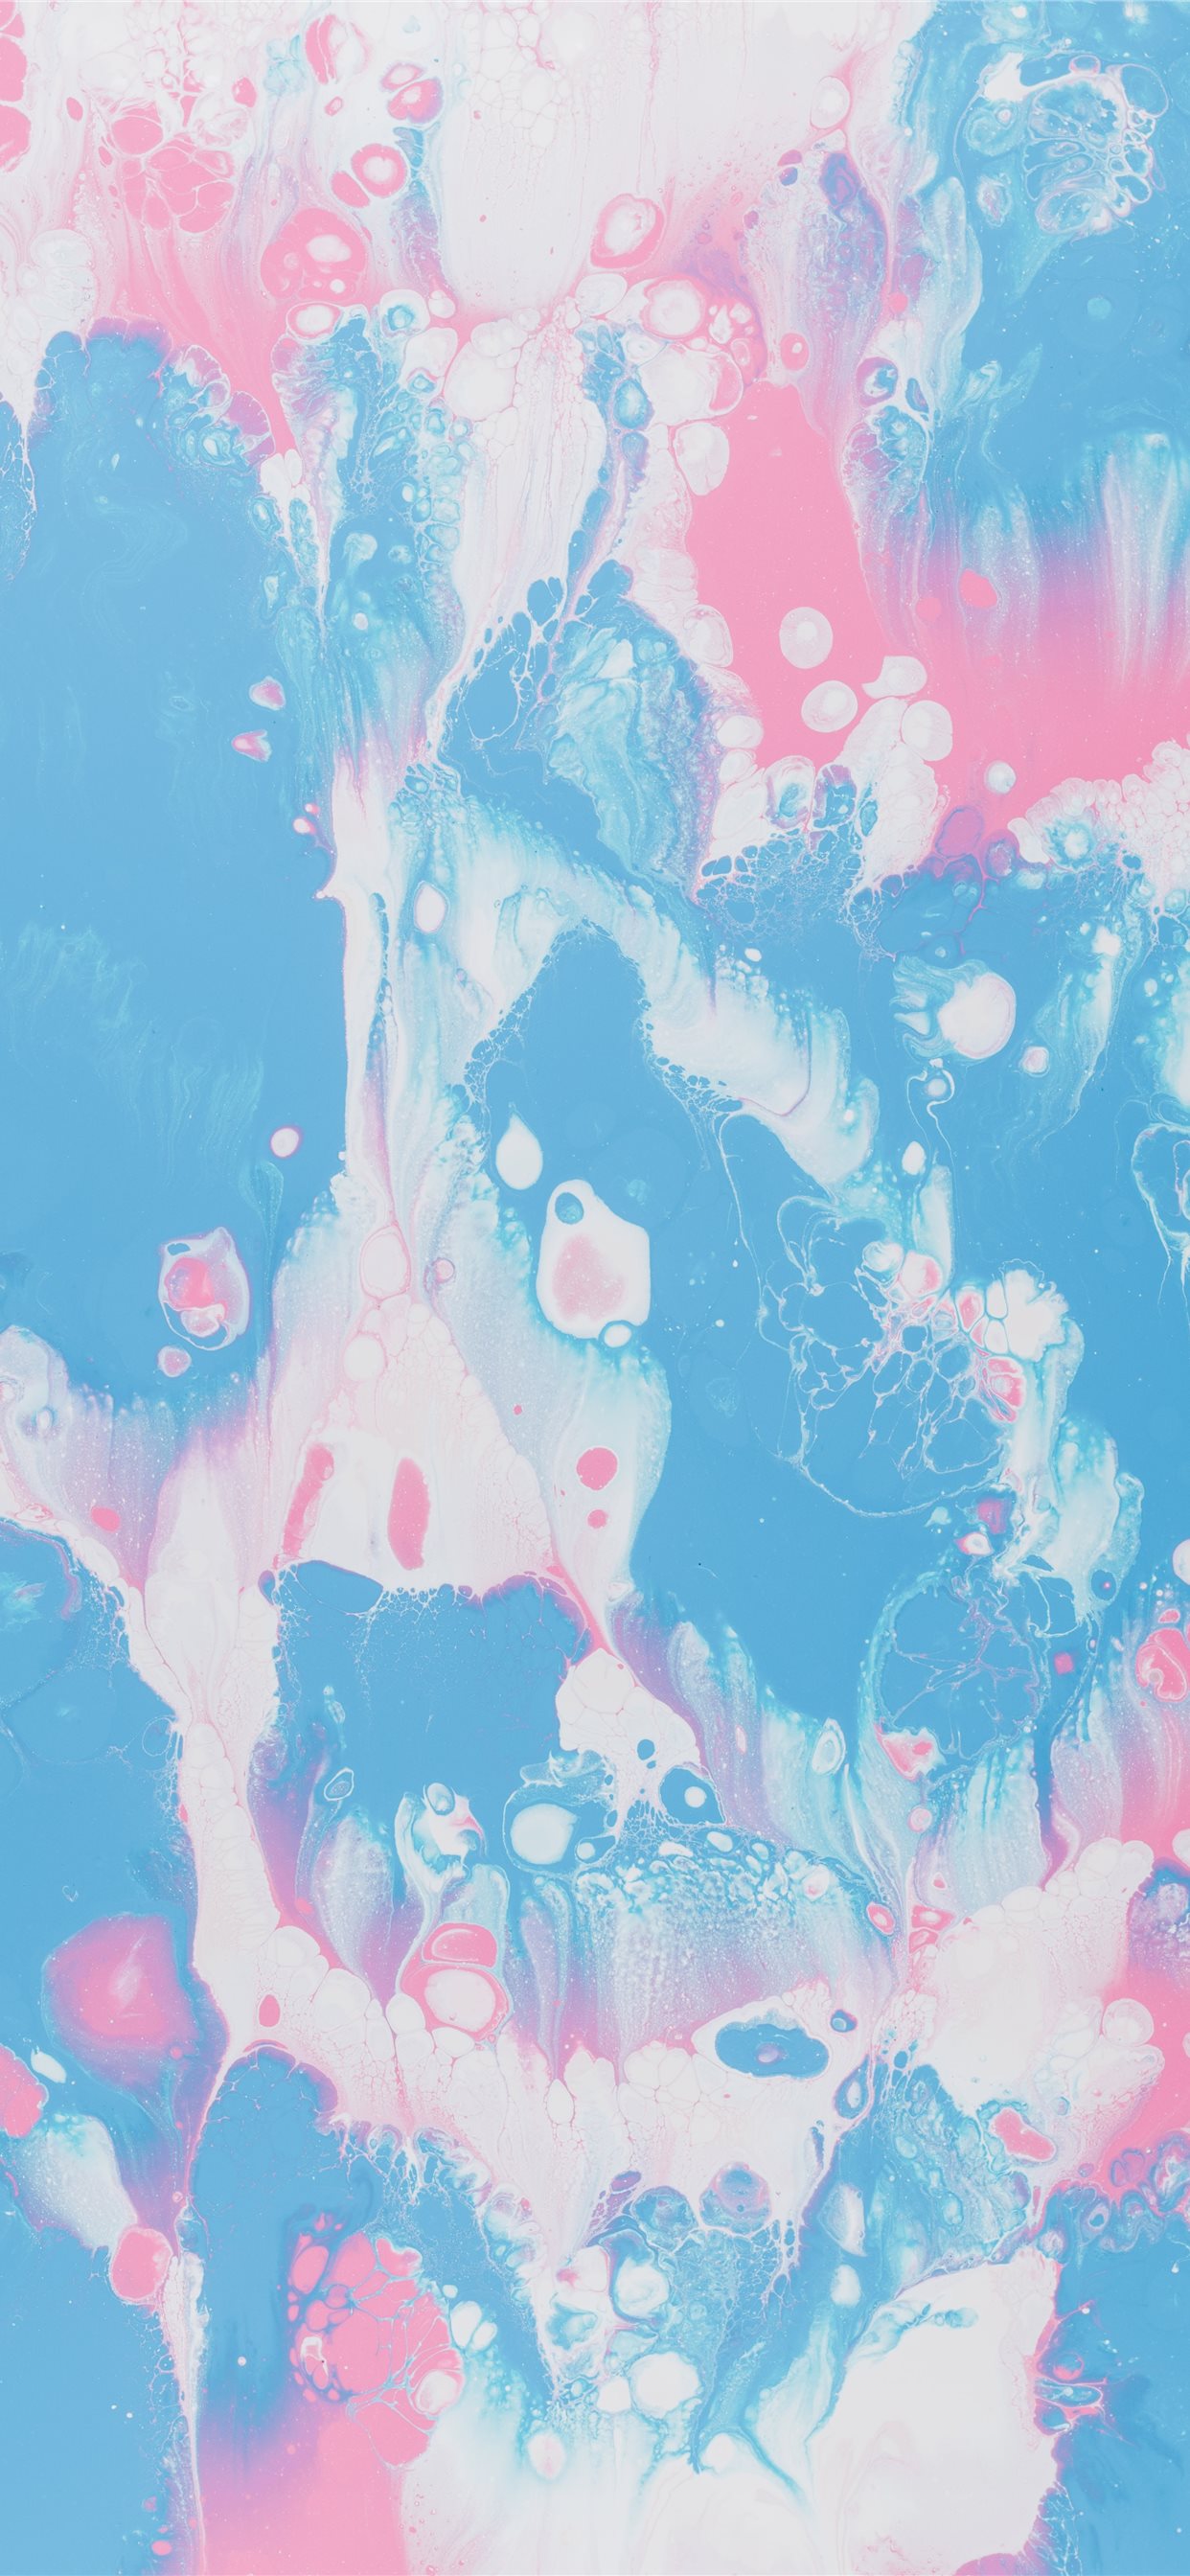 Pastel Pink and Blue iPhone Wallpaper  Pink and turquoise wallpaper Blue  abstract painting Wallpaper pink and blue